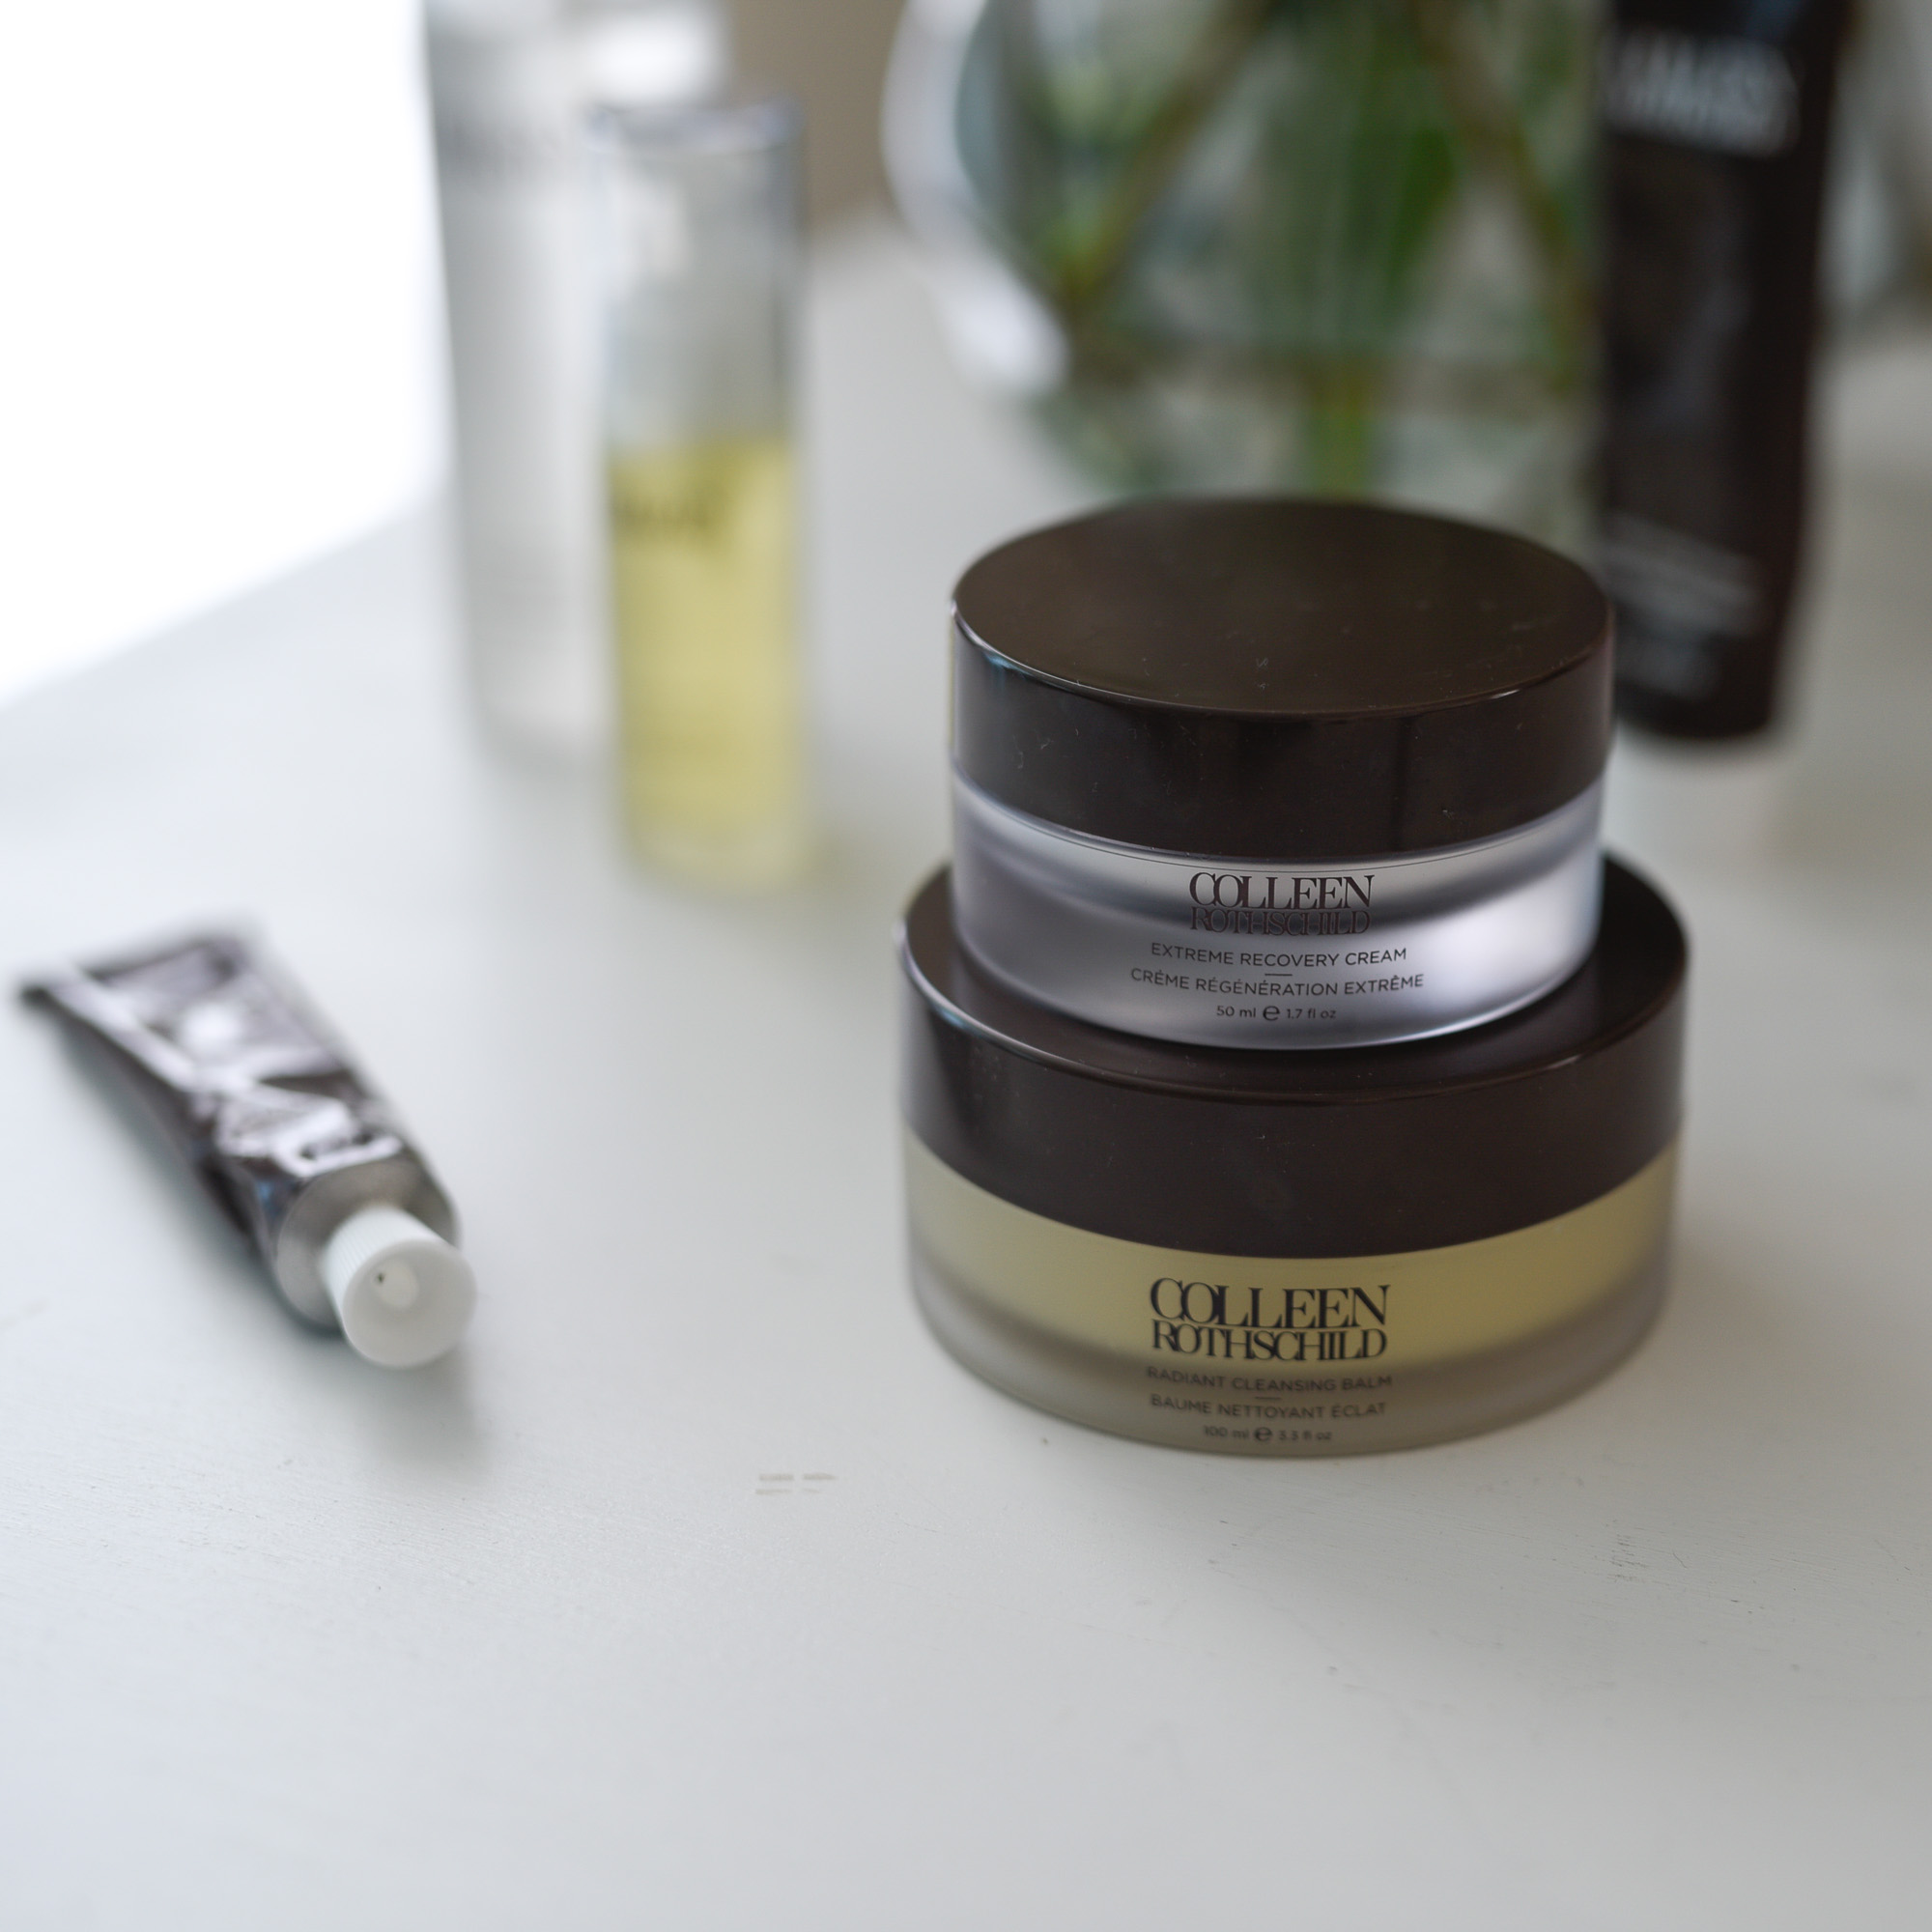 A morning and evening skin care routine that is so easy